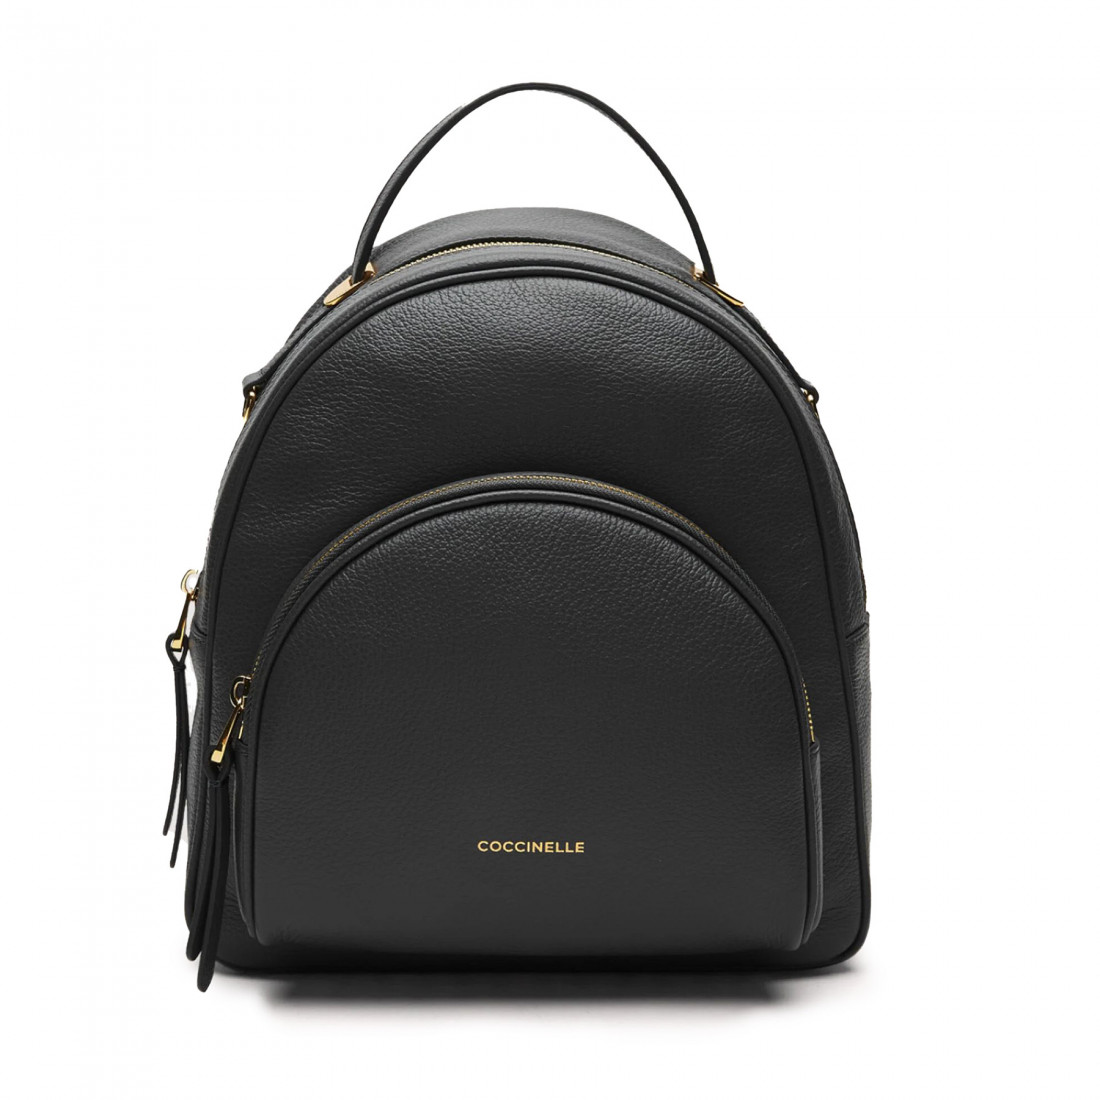 Lea Coccinelle bag in black leather